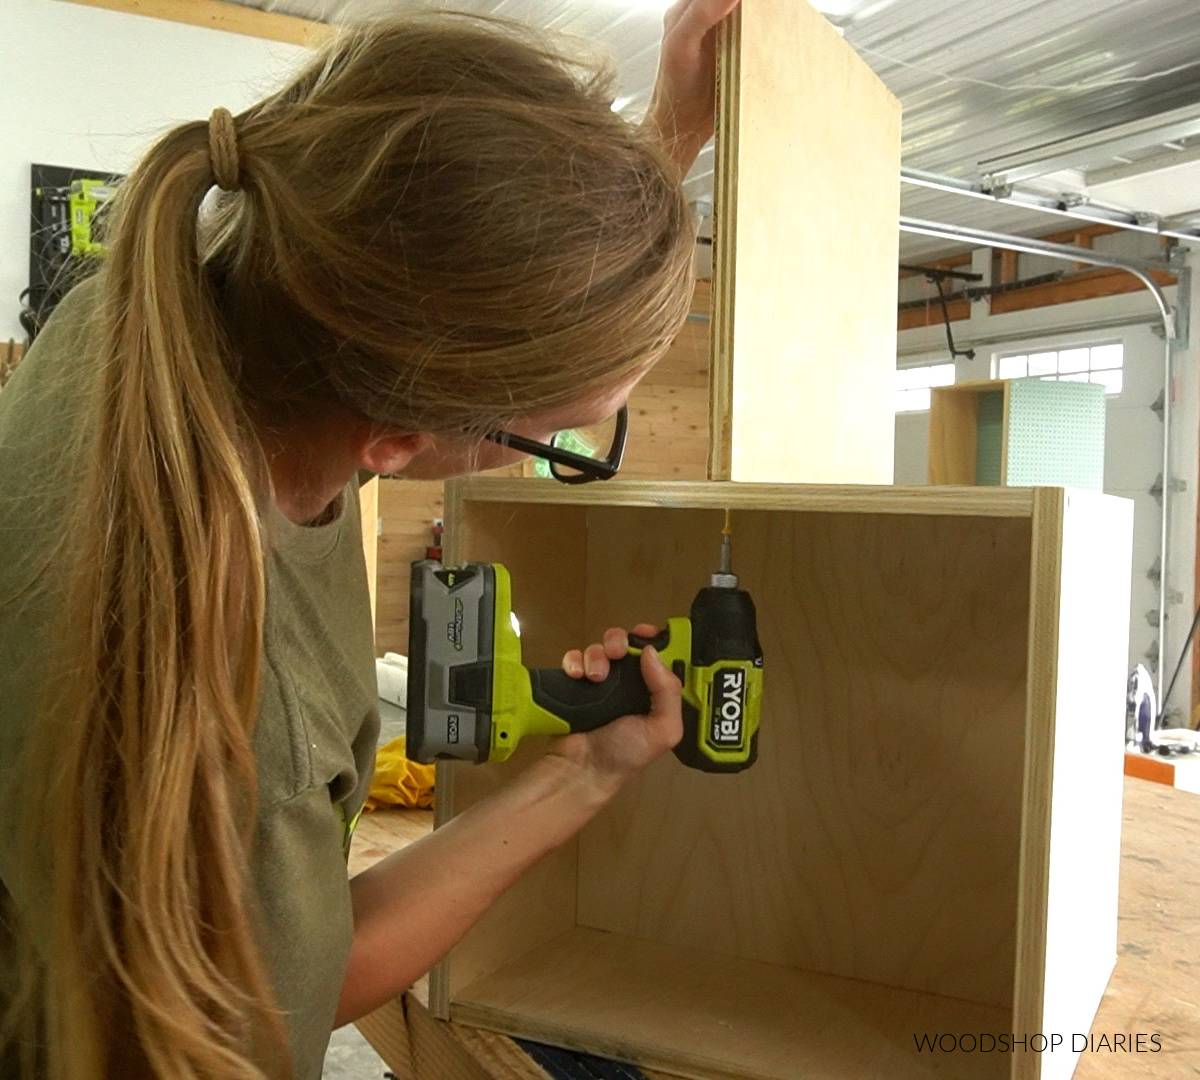 Shara Woodshop Diaries driving screws through plywood to attach top half of charging station box